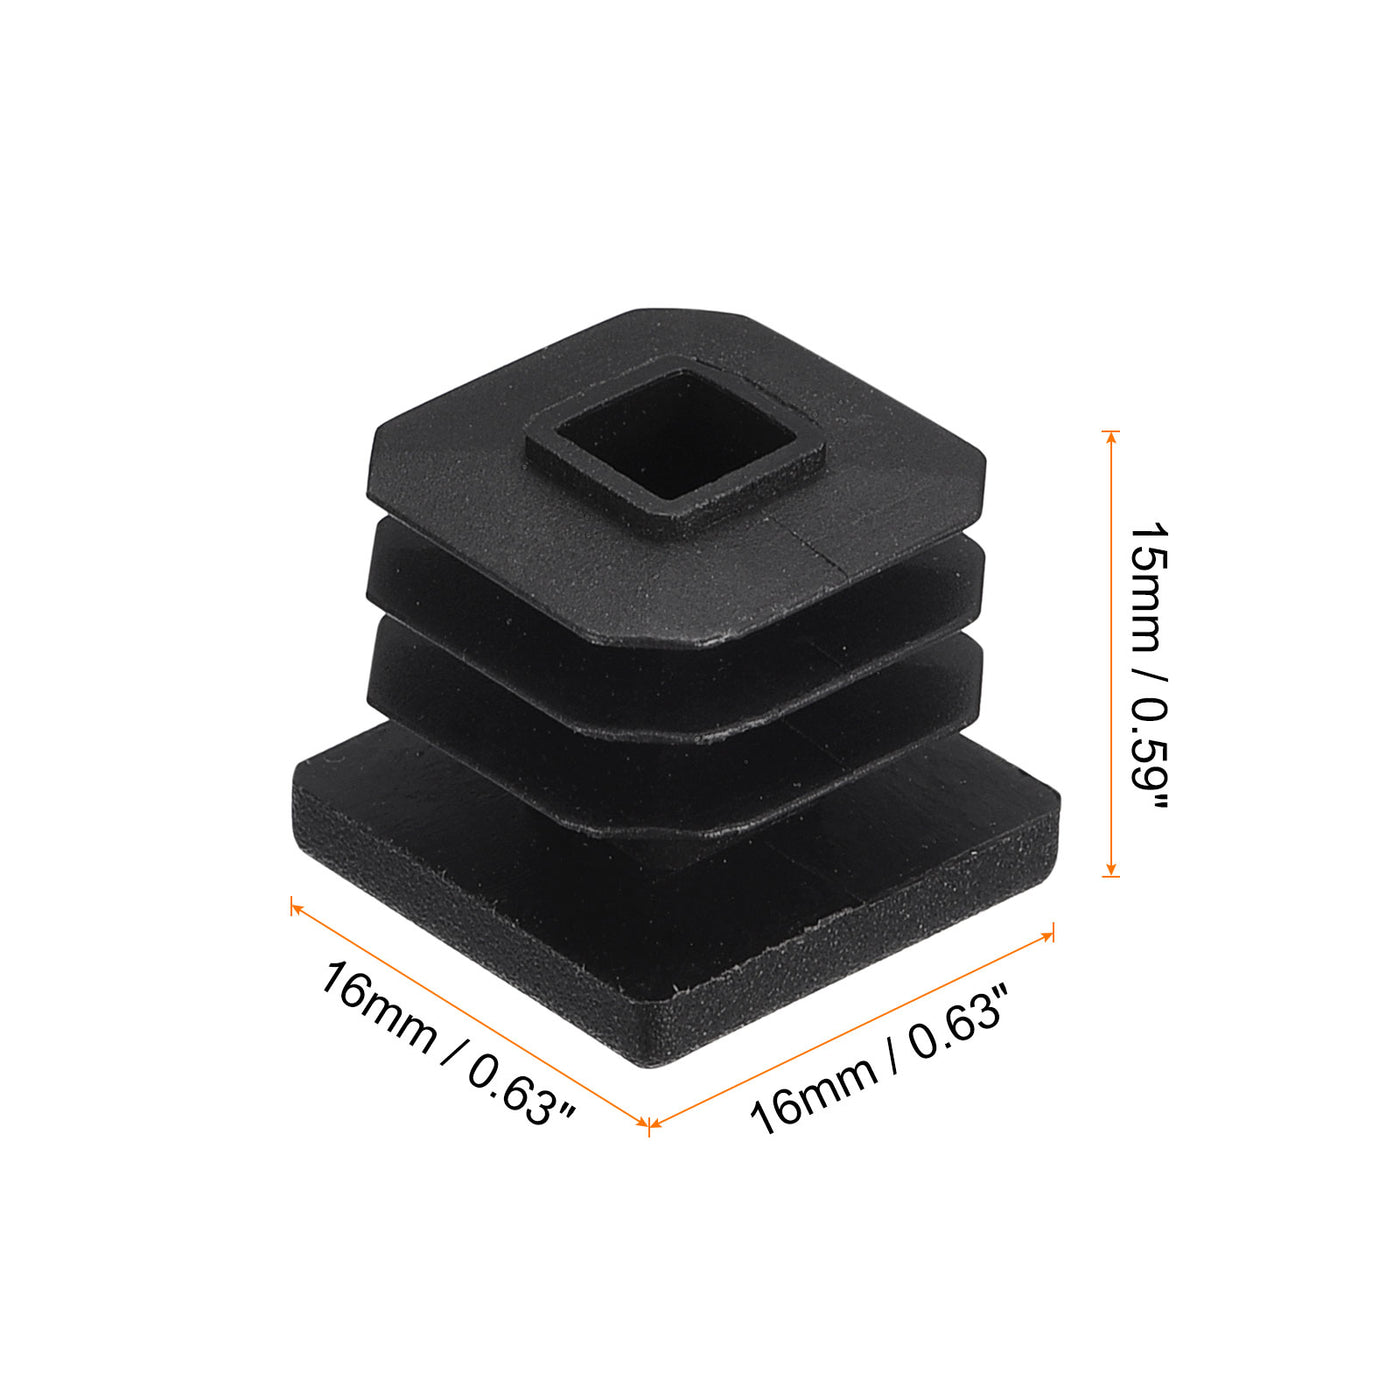 uxcell Uxcell 4Pcs 16mmx16mm(0.63inch) Plastic Tubing Plug Square Post End Caps Black